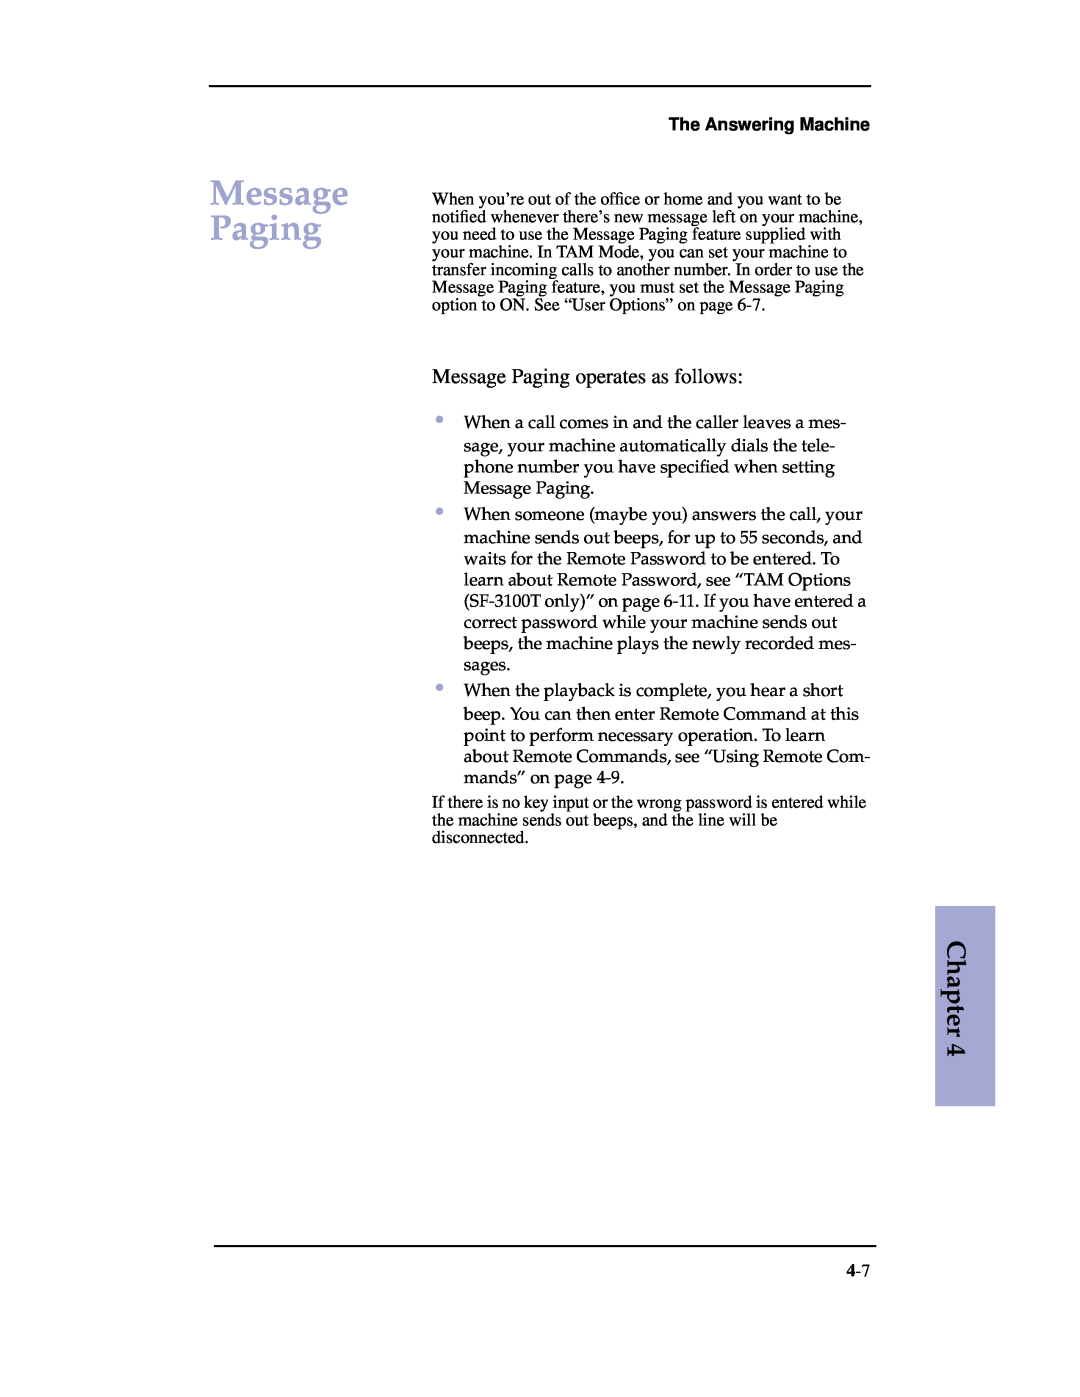 Samsung SF-3100 manual Message Paging operates as follows, Chapter, The Answering Machine 